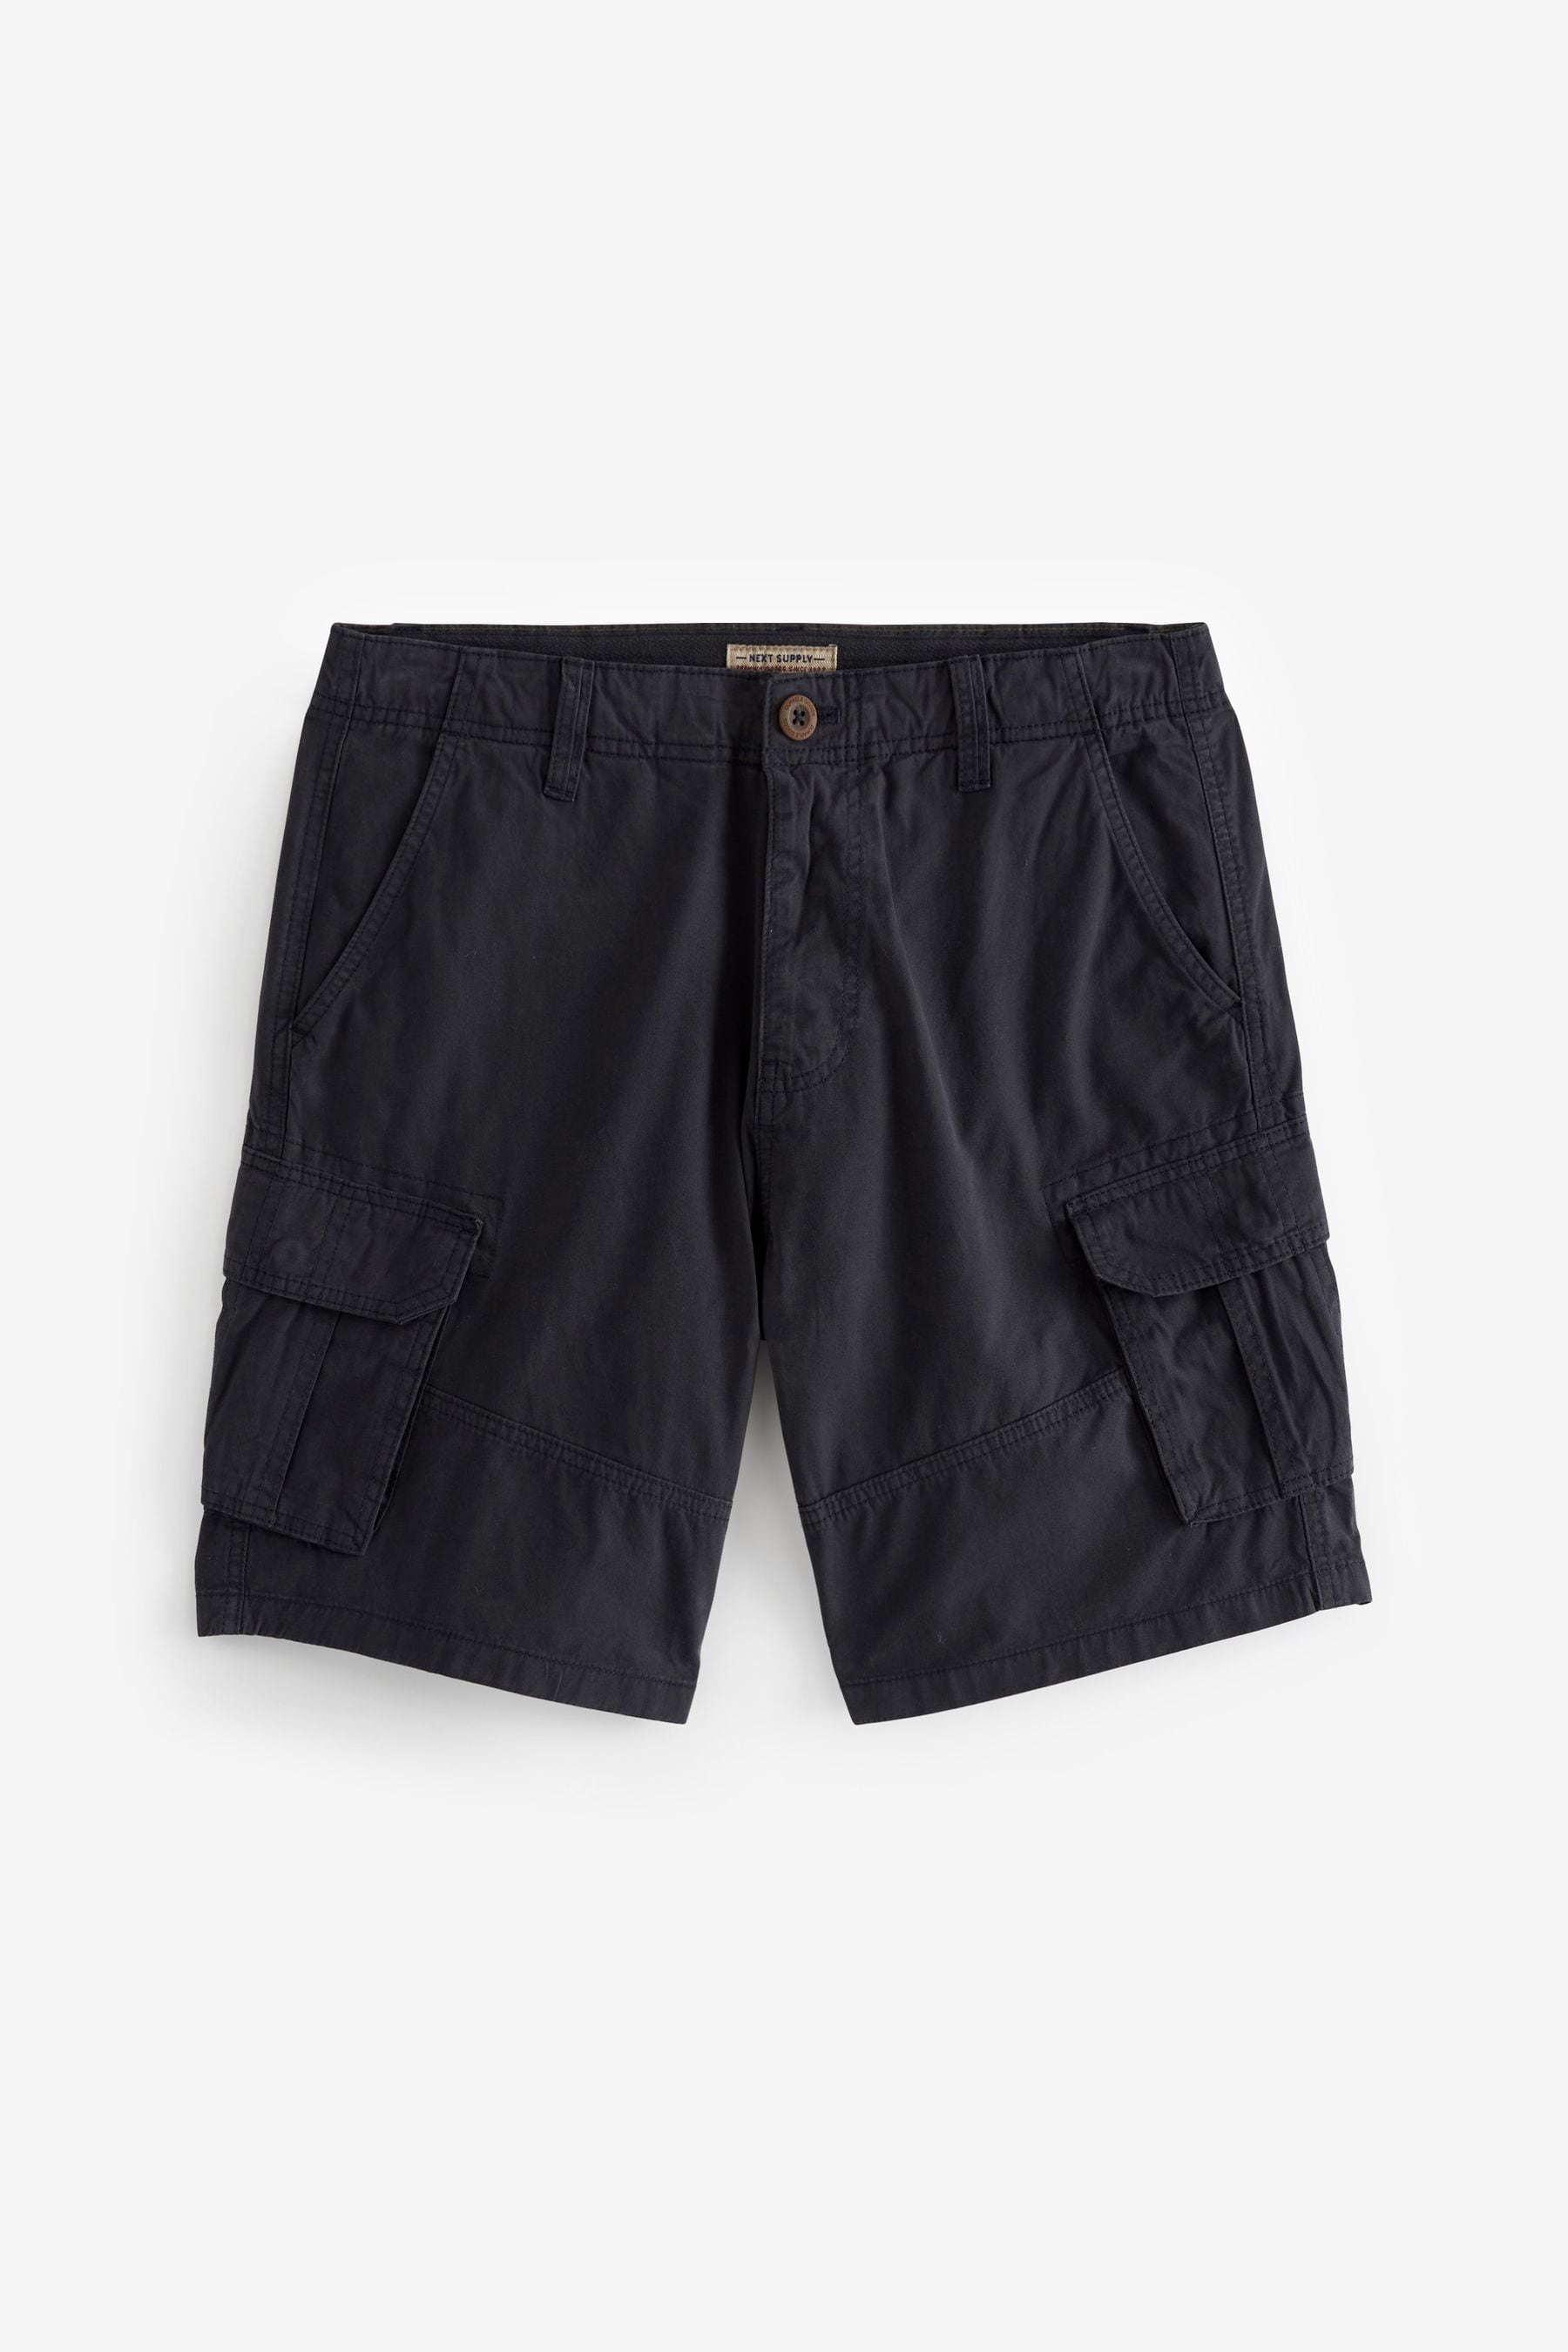 Buy Navy Blue Cotton Cargo Shorts from the Next UK online shop